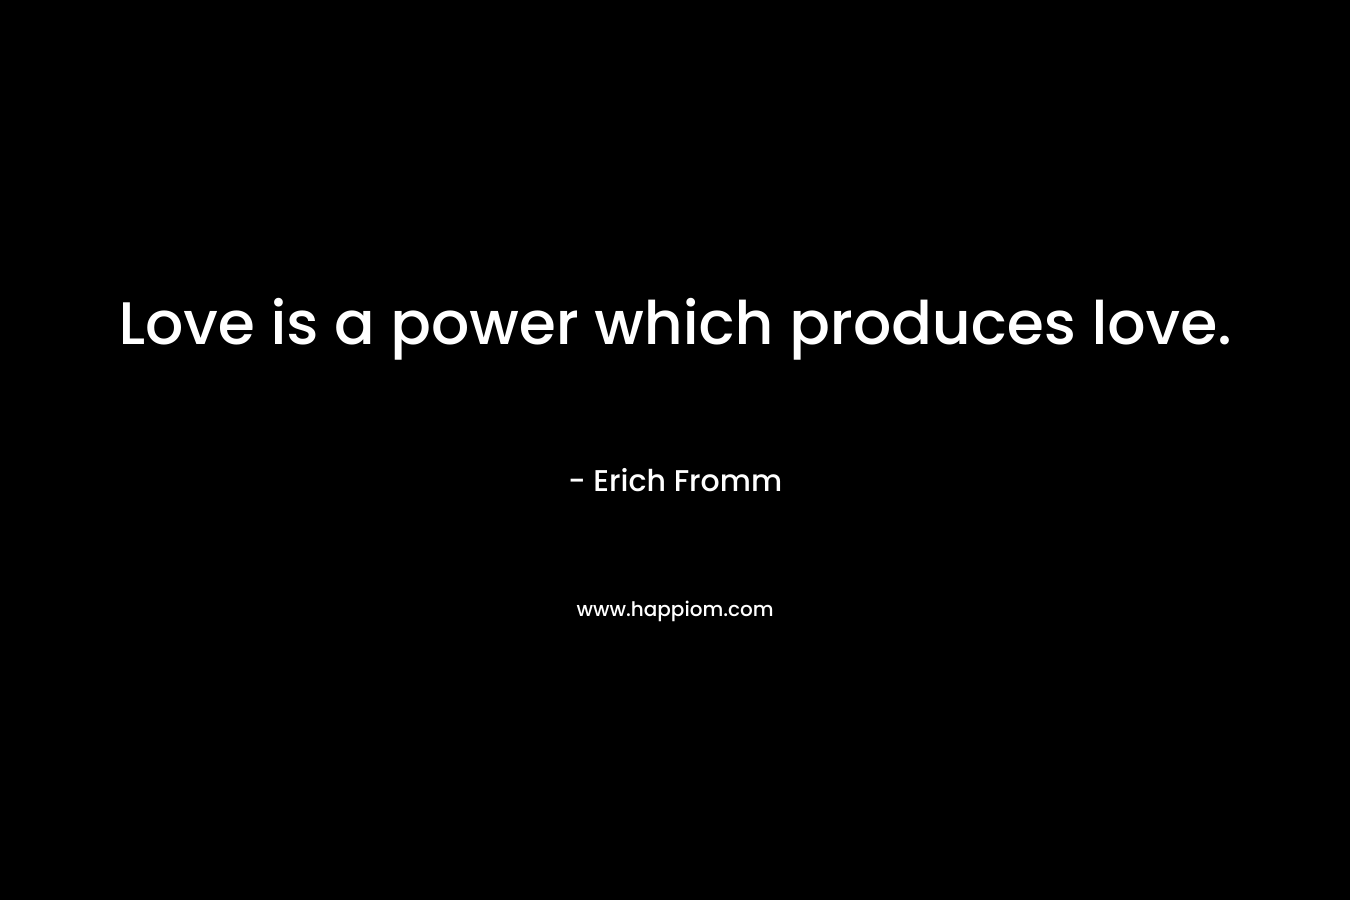 Love is a power which produces love. – Erich Fromm